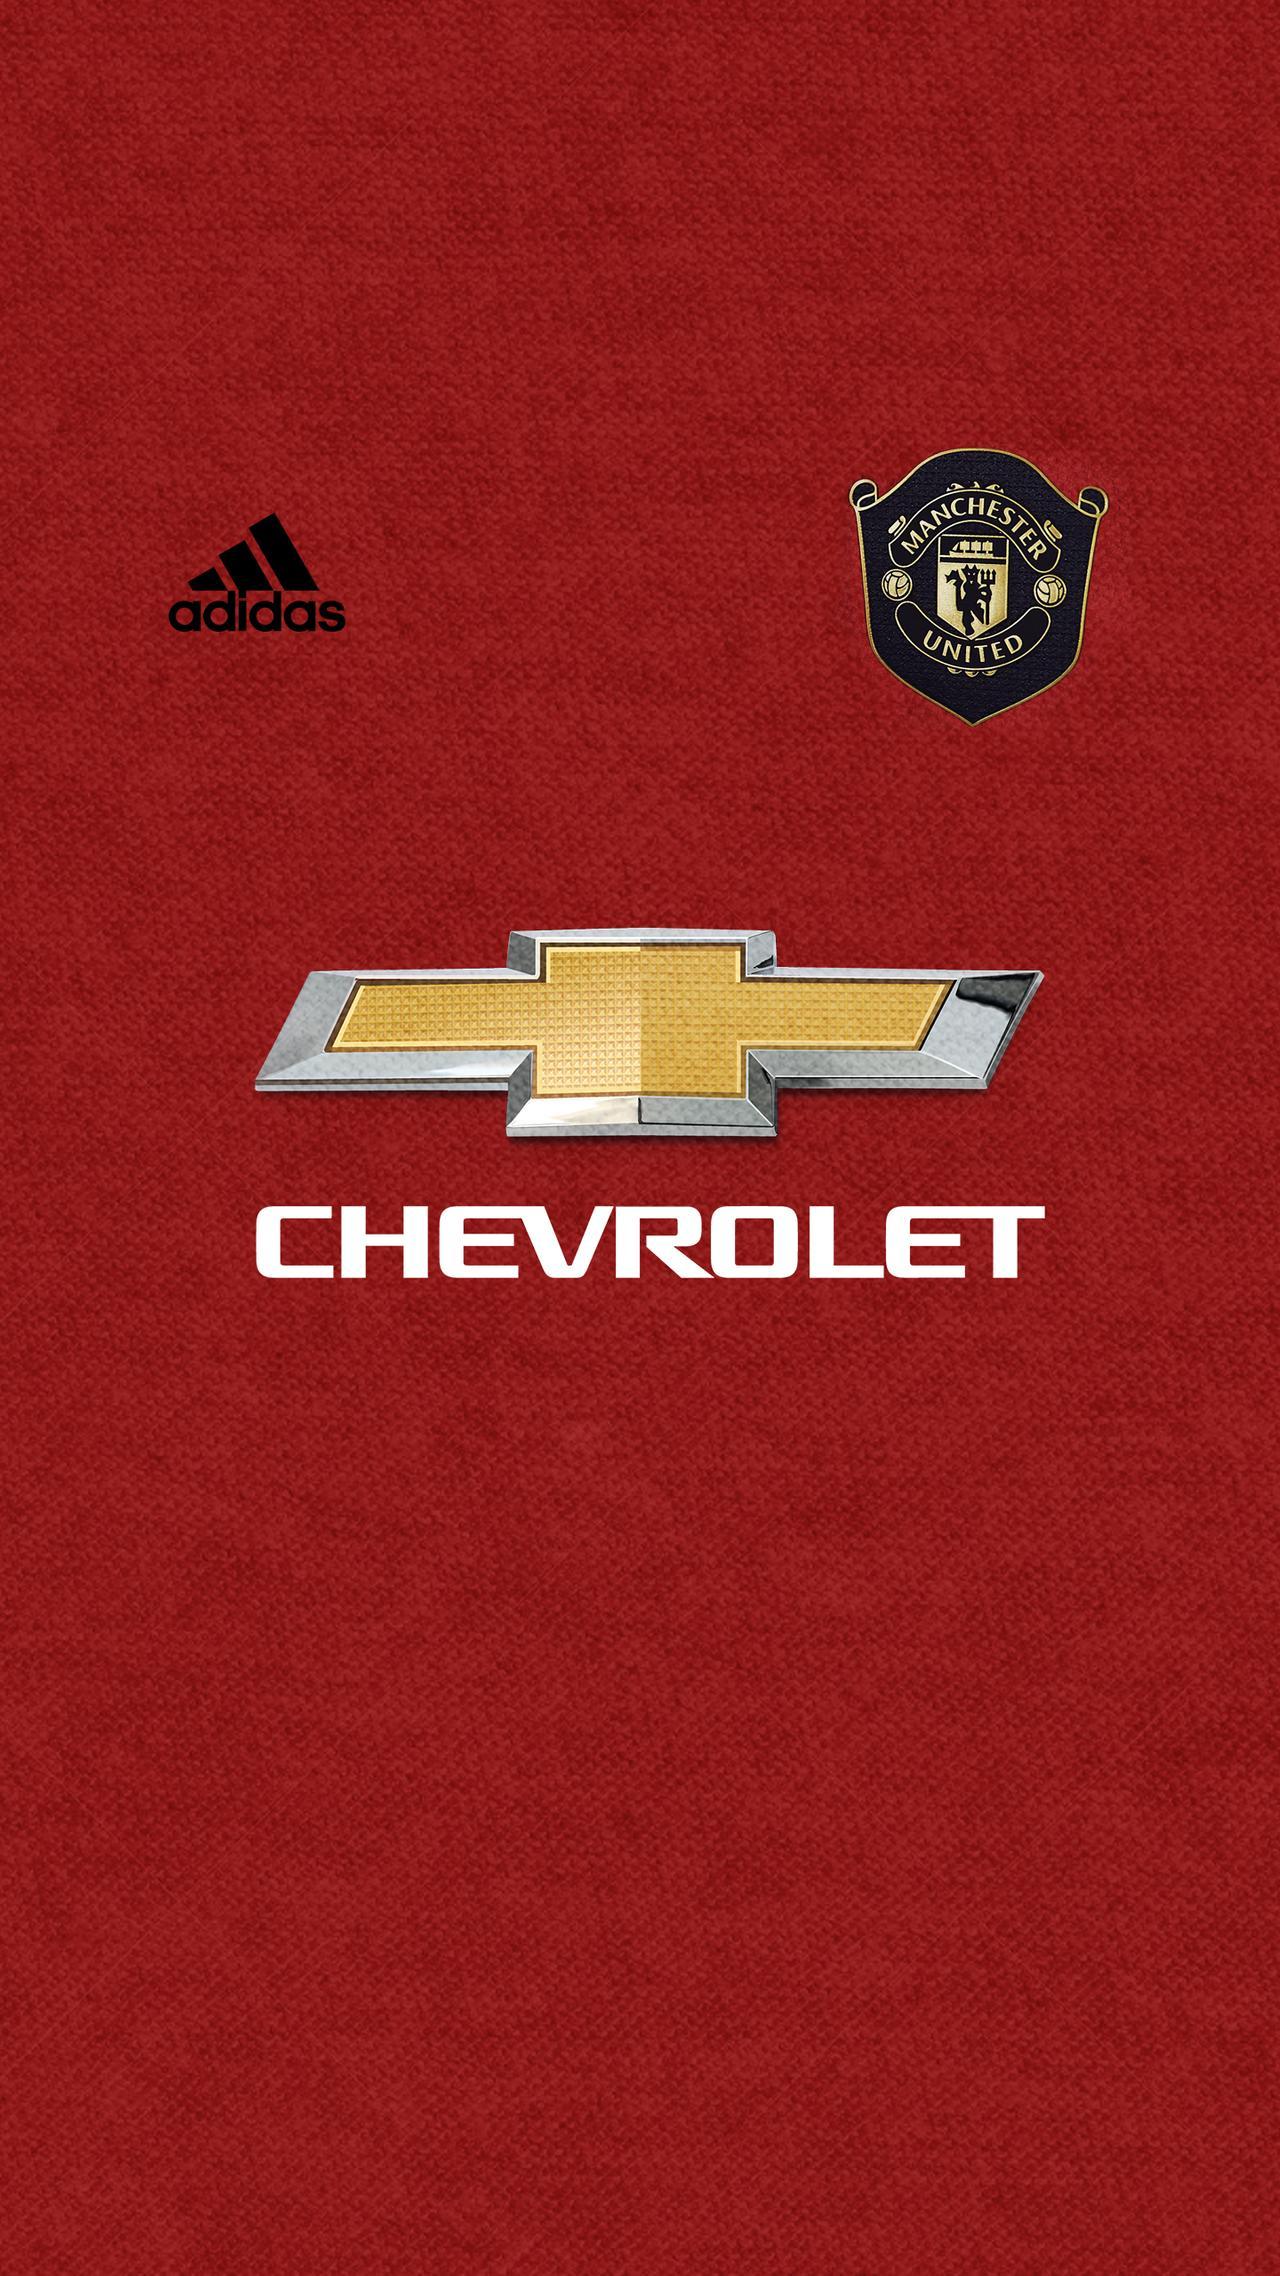 Manchester United 2021 Wallpapers - Top Free Manchester United 2021